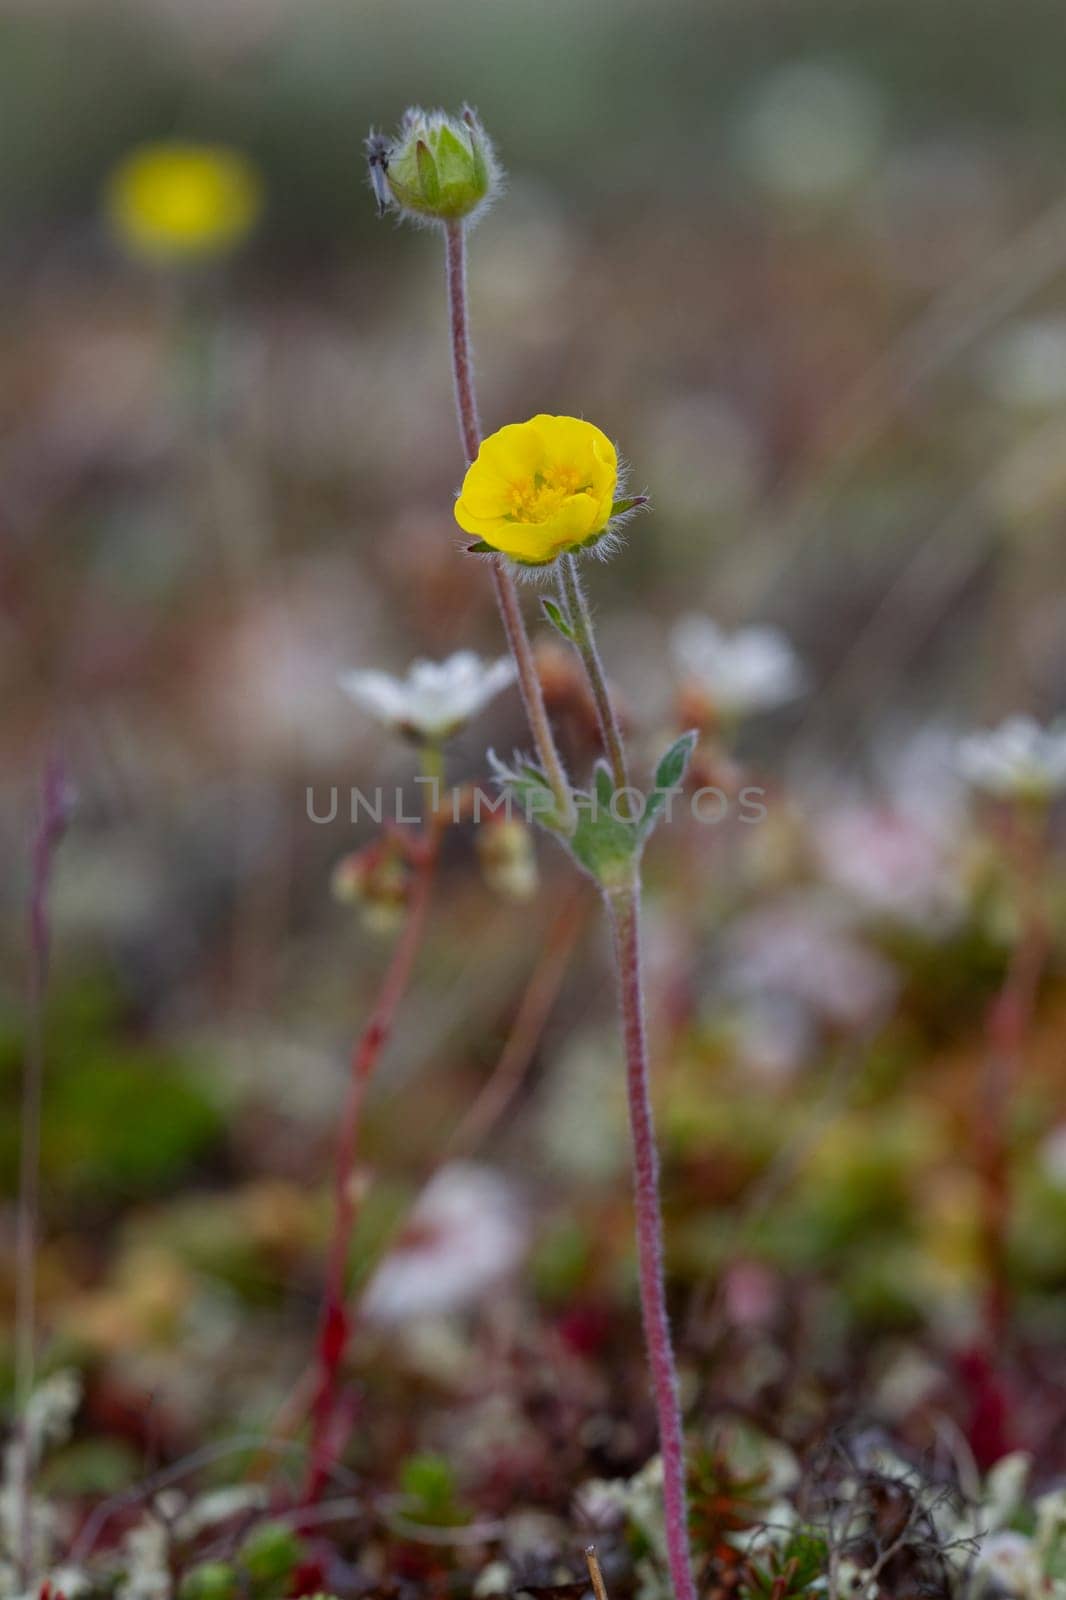 A single arctic cinquefoil flower growing on the tundra in central Nunavut, Canada by Granchinho